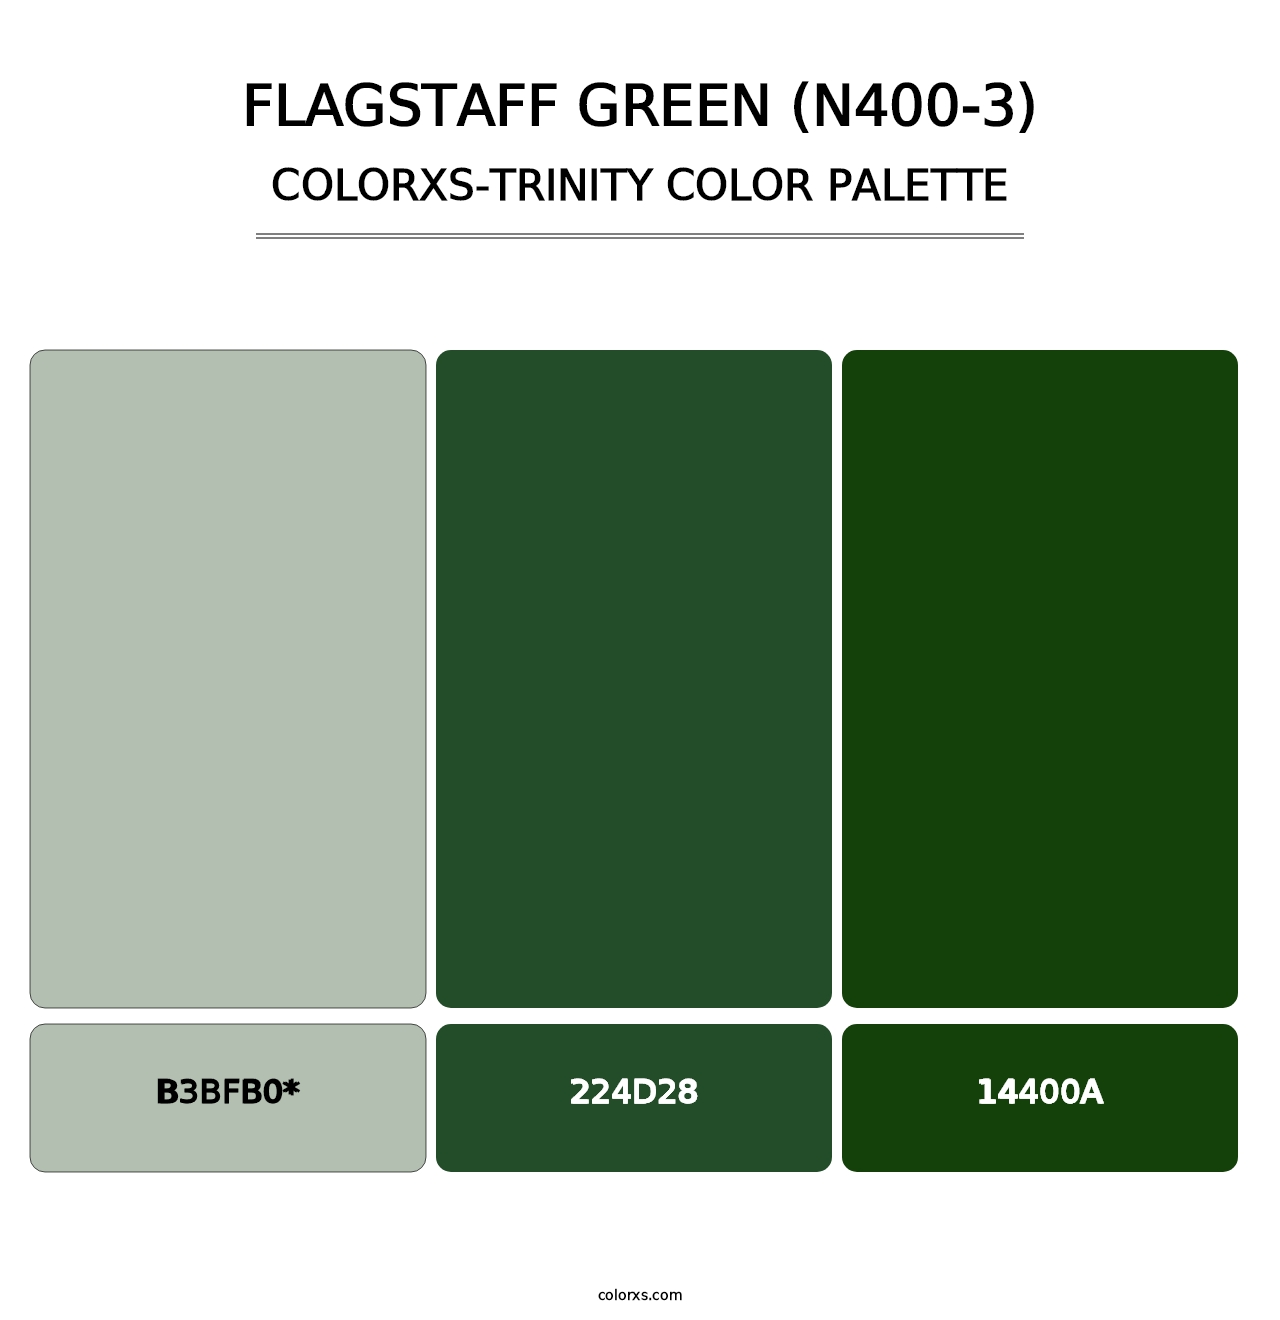 Flagstaff Green (N400-3) - Colorxs Trinity Palette